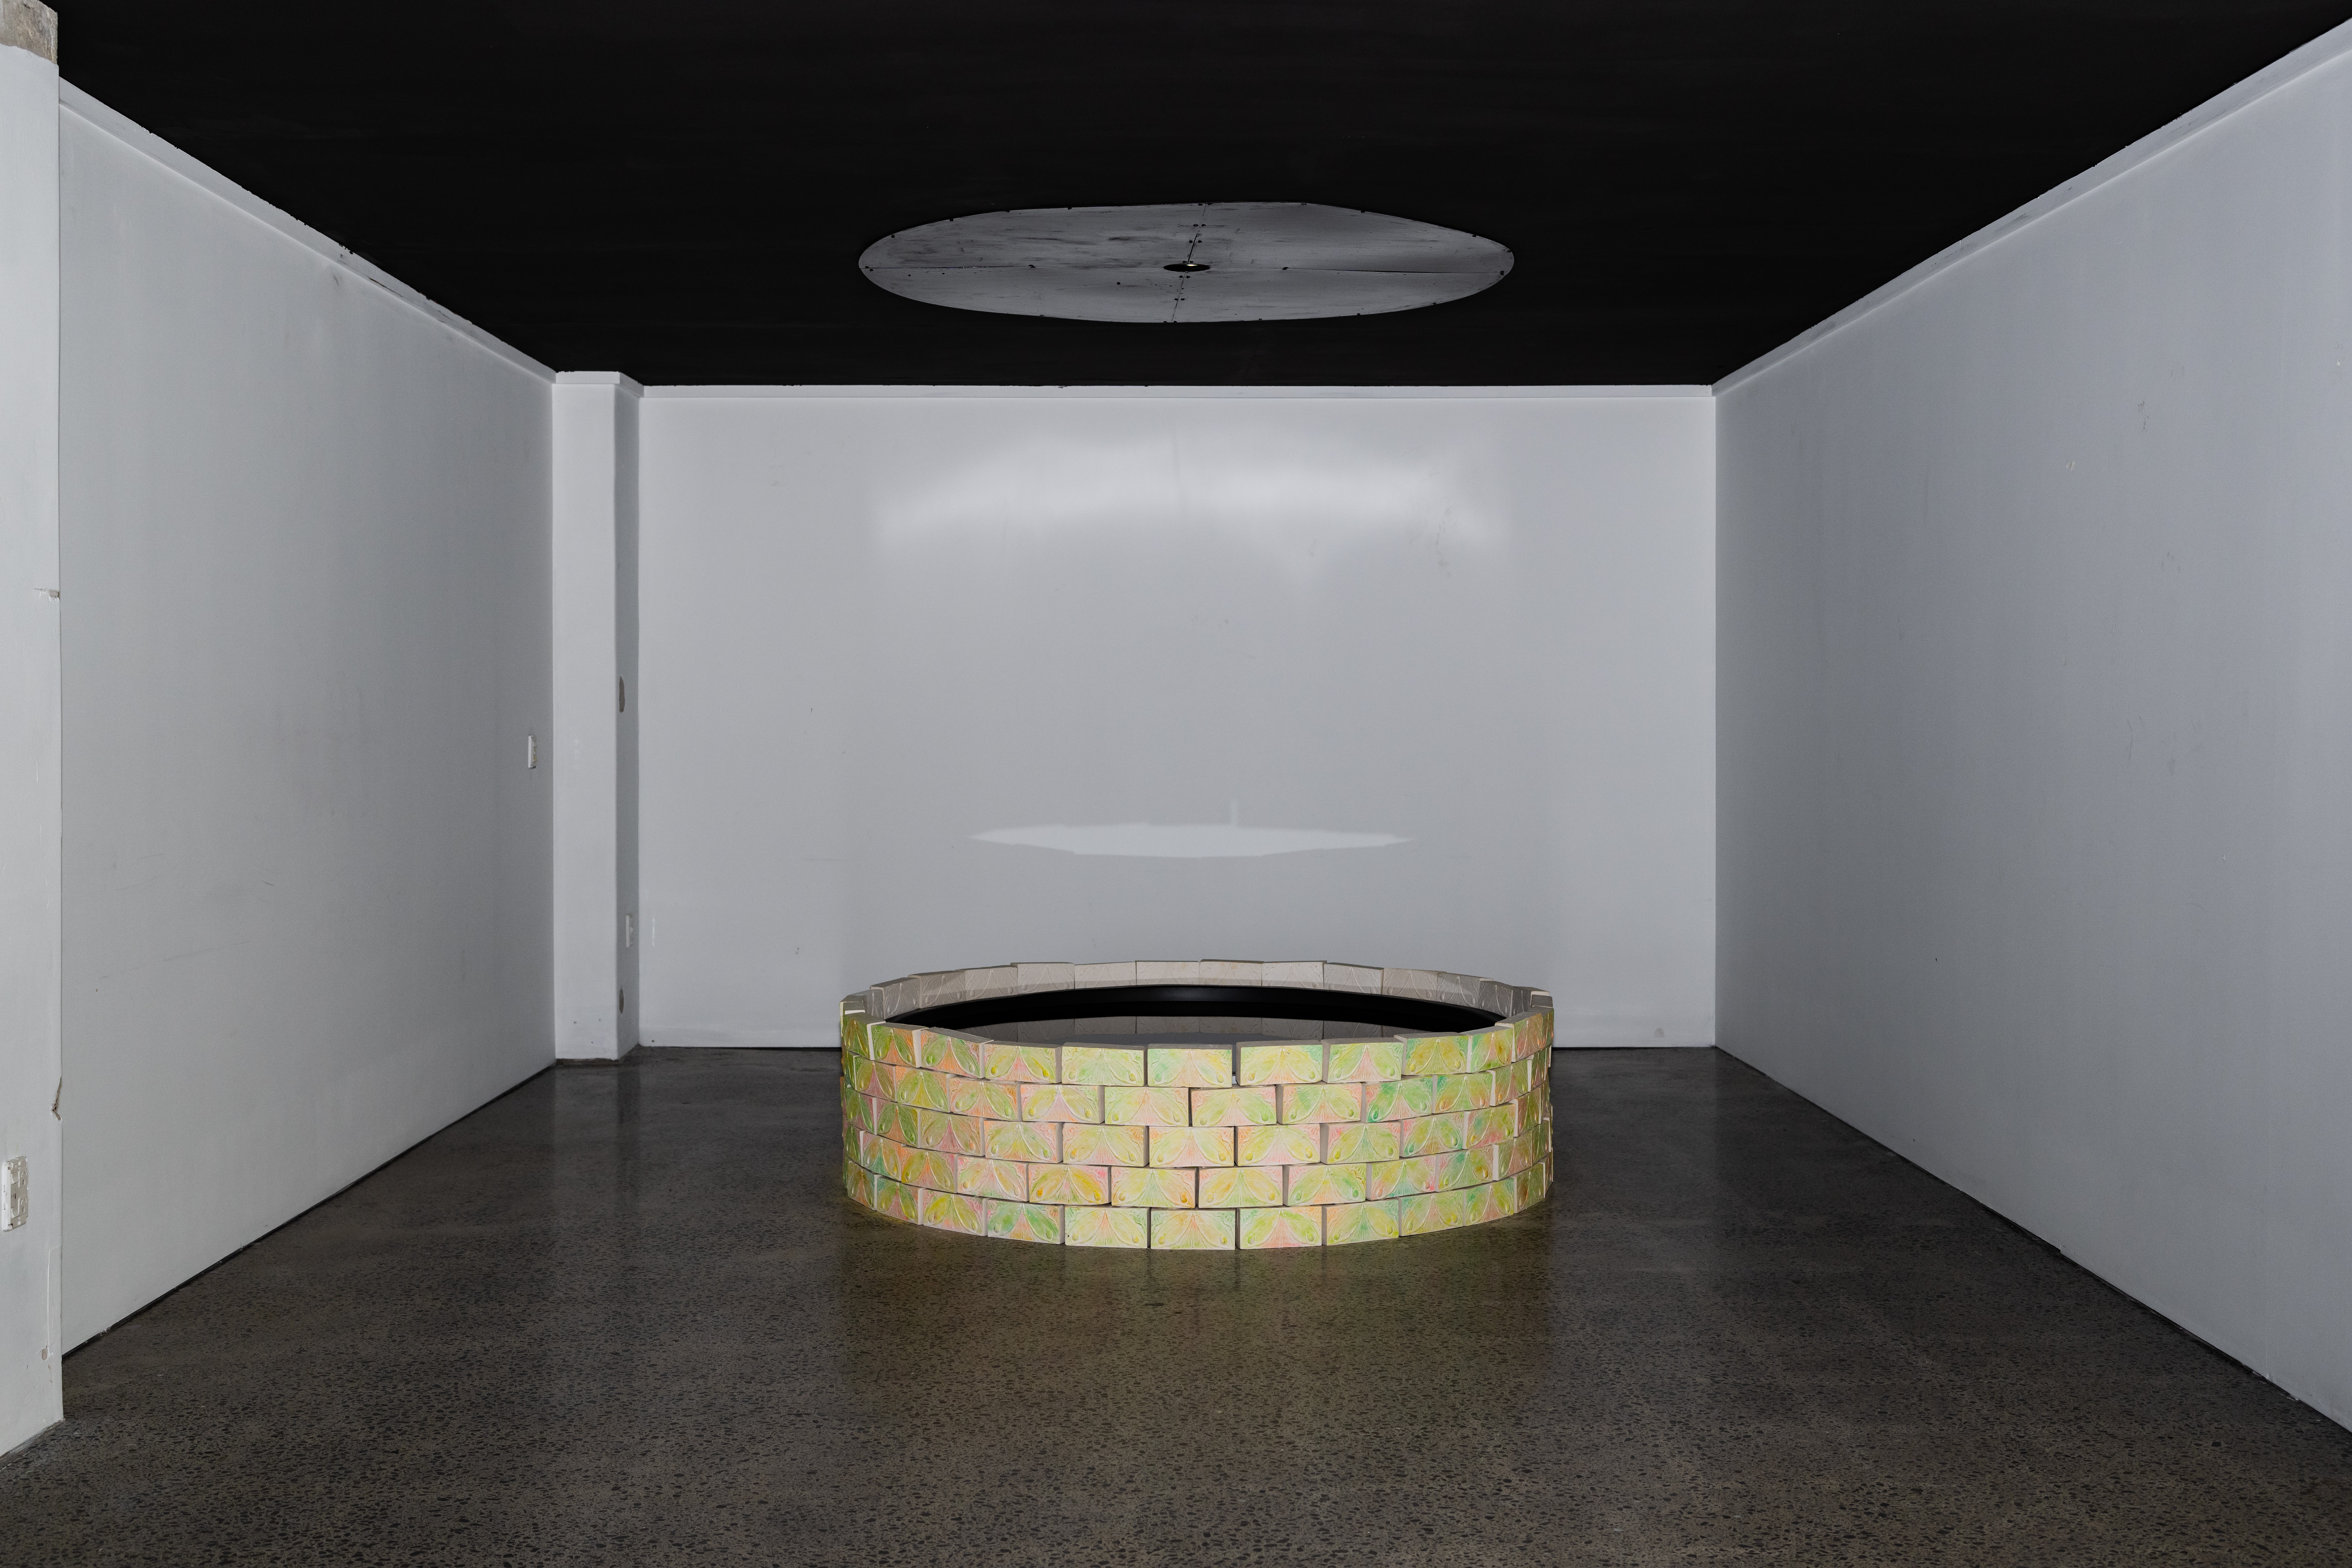 a well built from handmade bricks, a circular projection of video work sits inside the well and reflects onto the ceiling